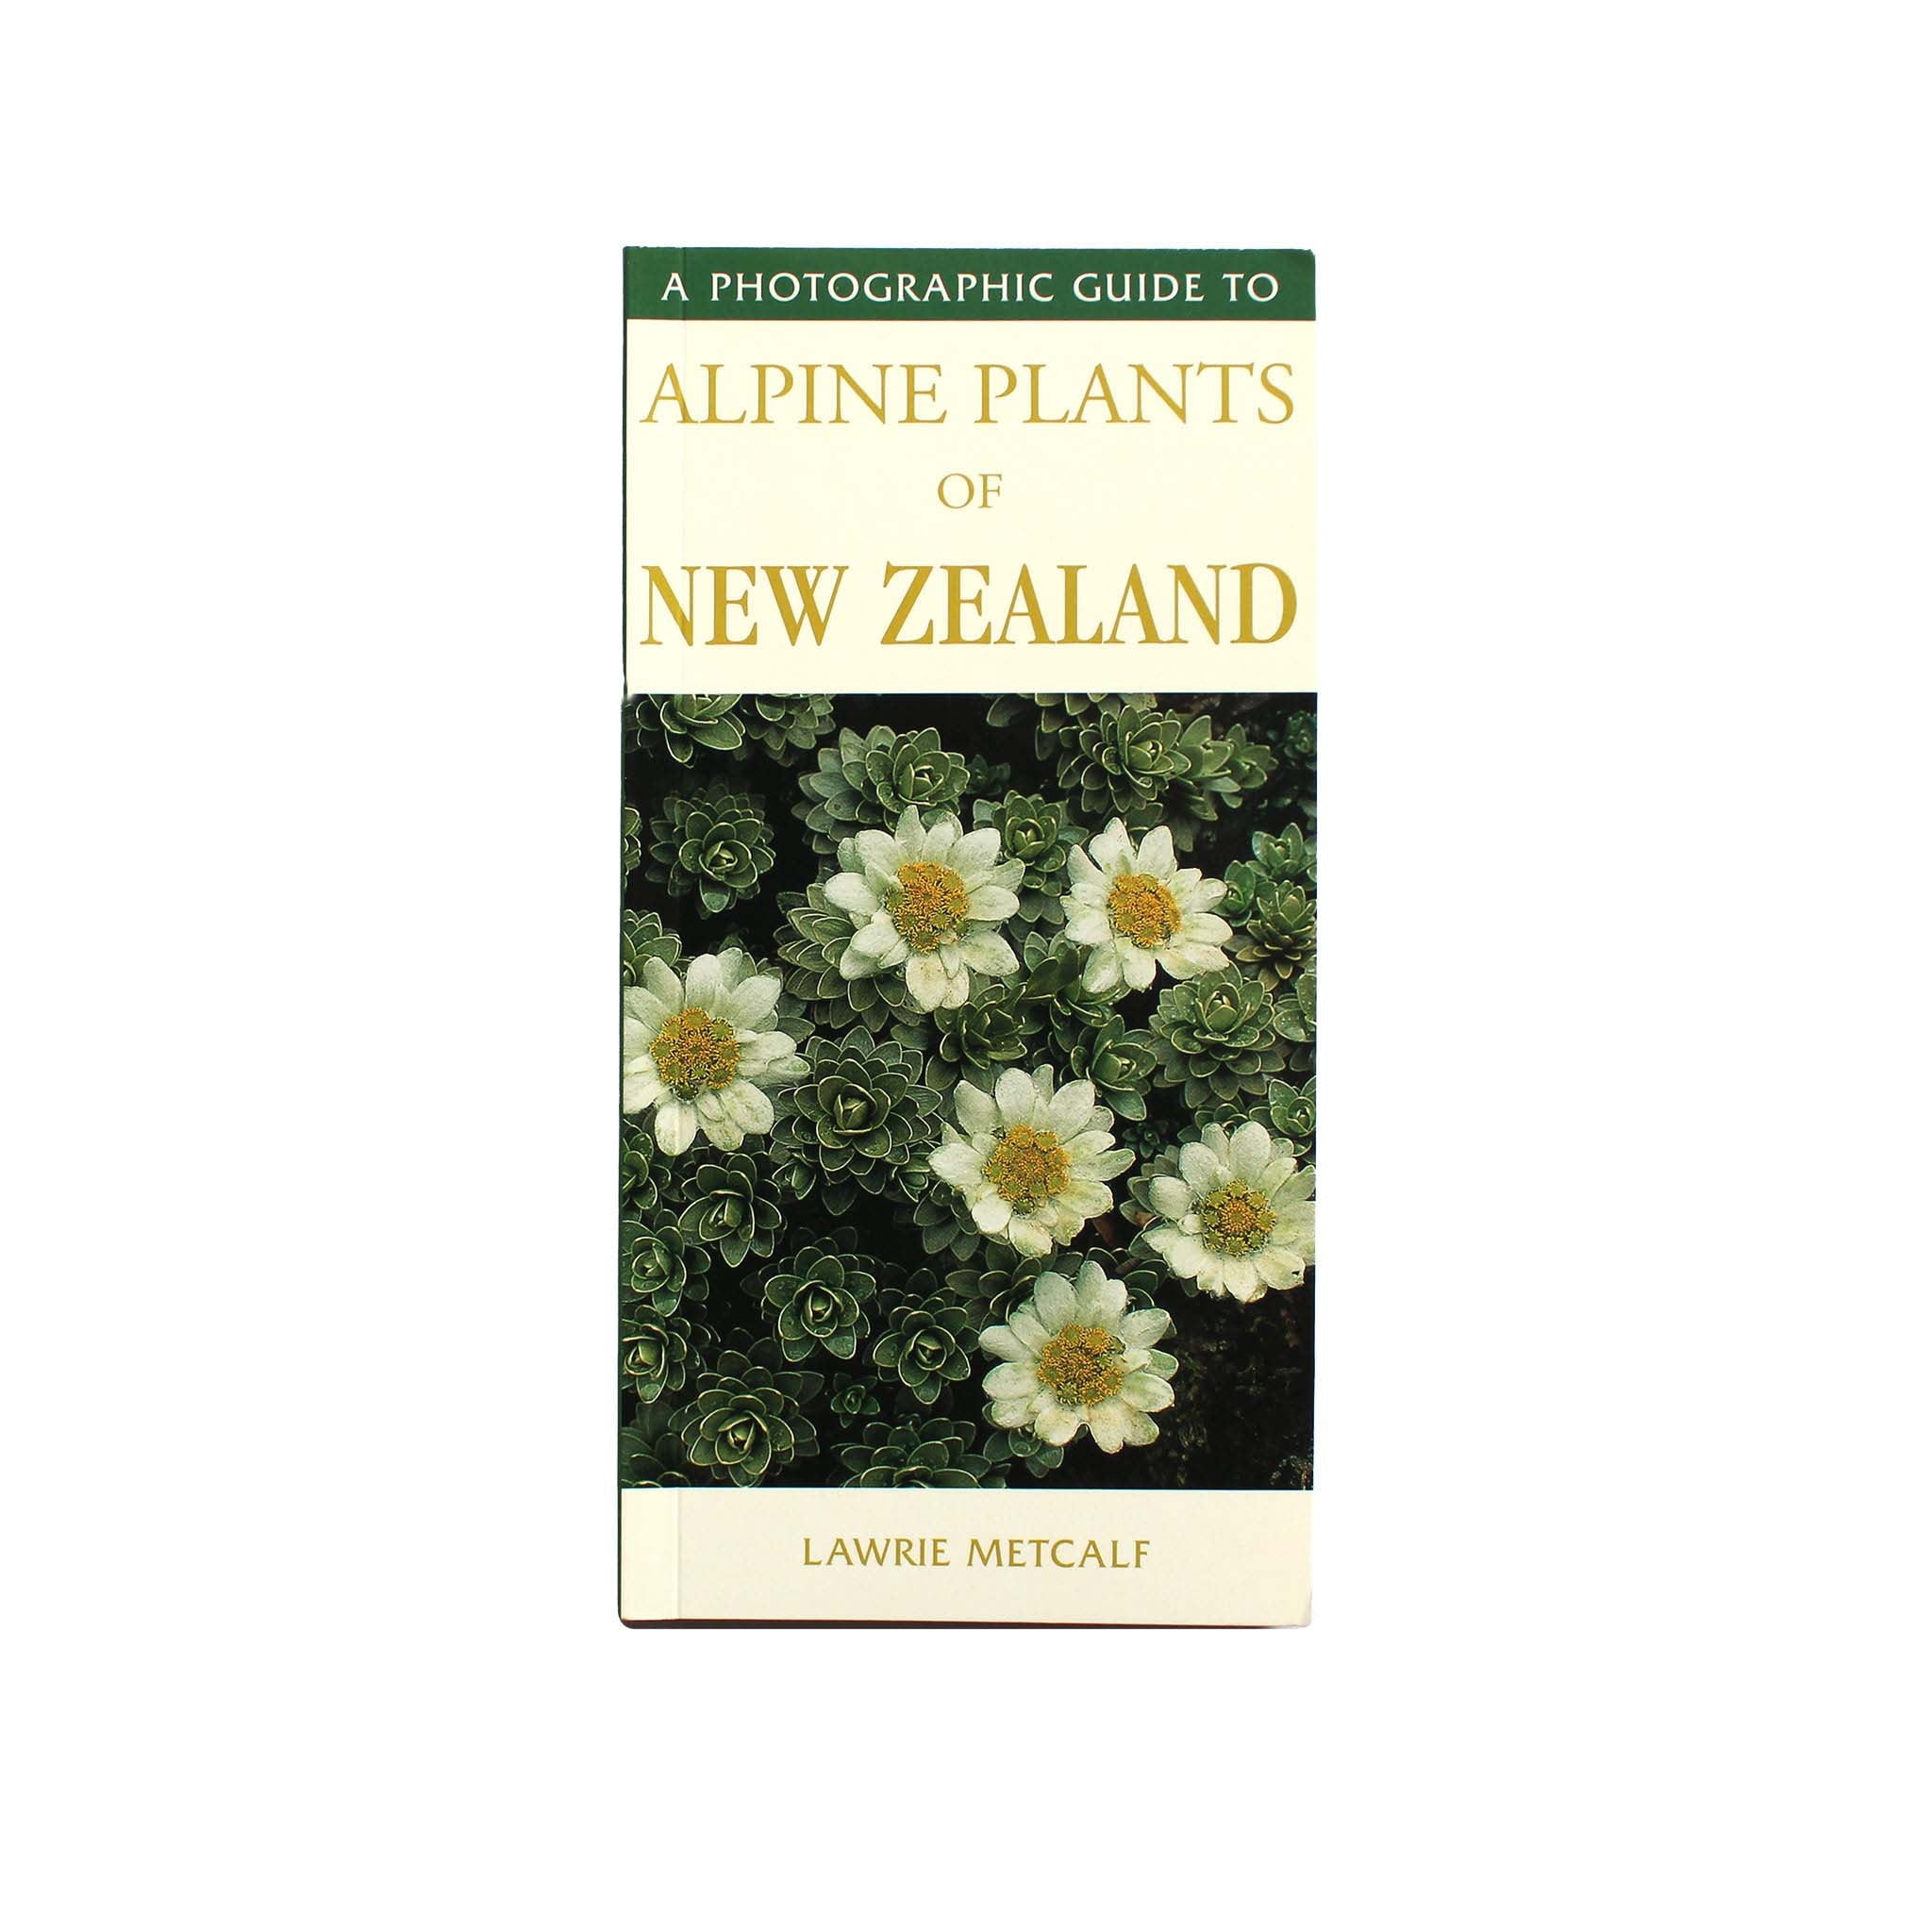 A Photographic Guide to Alpine Plants of New Zealand